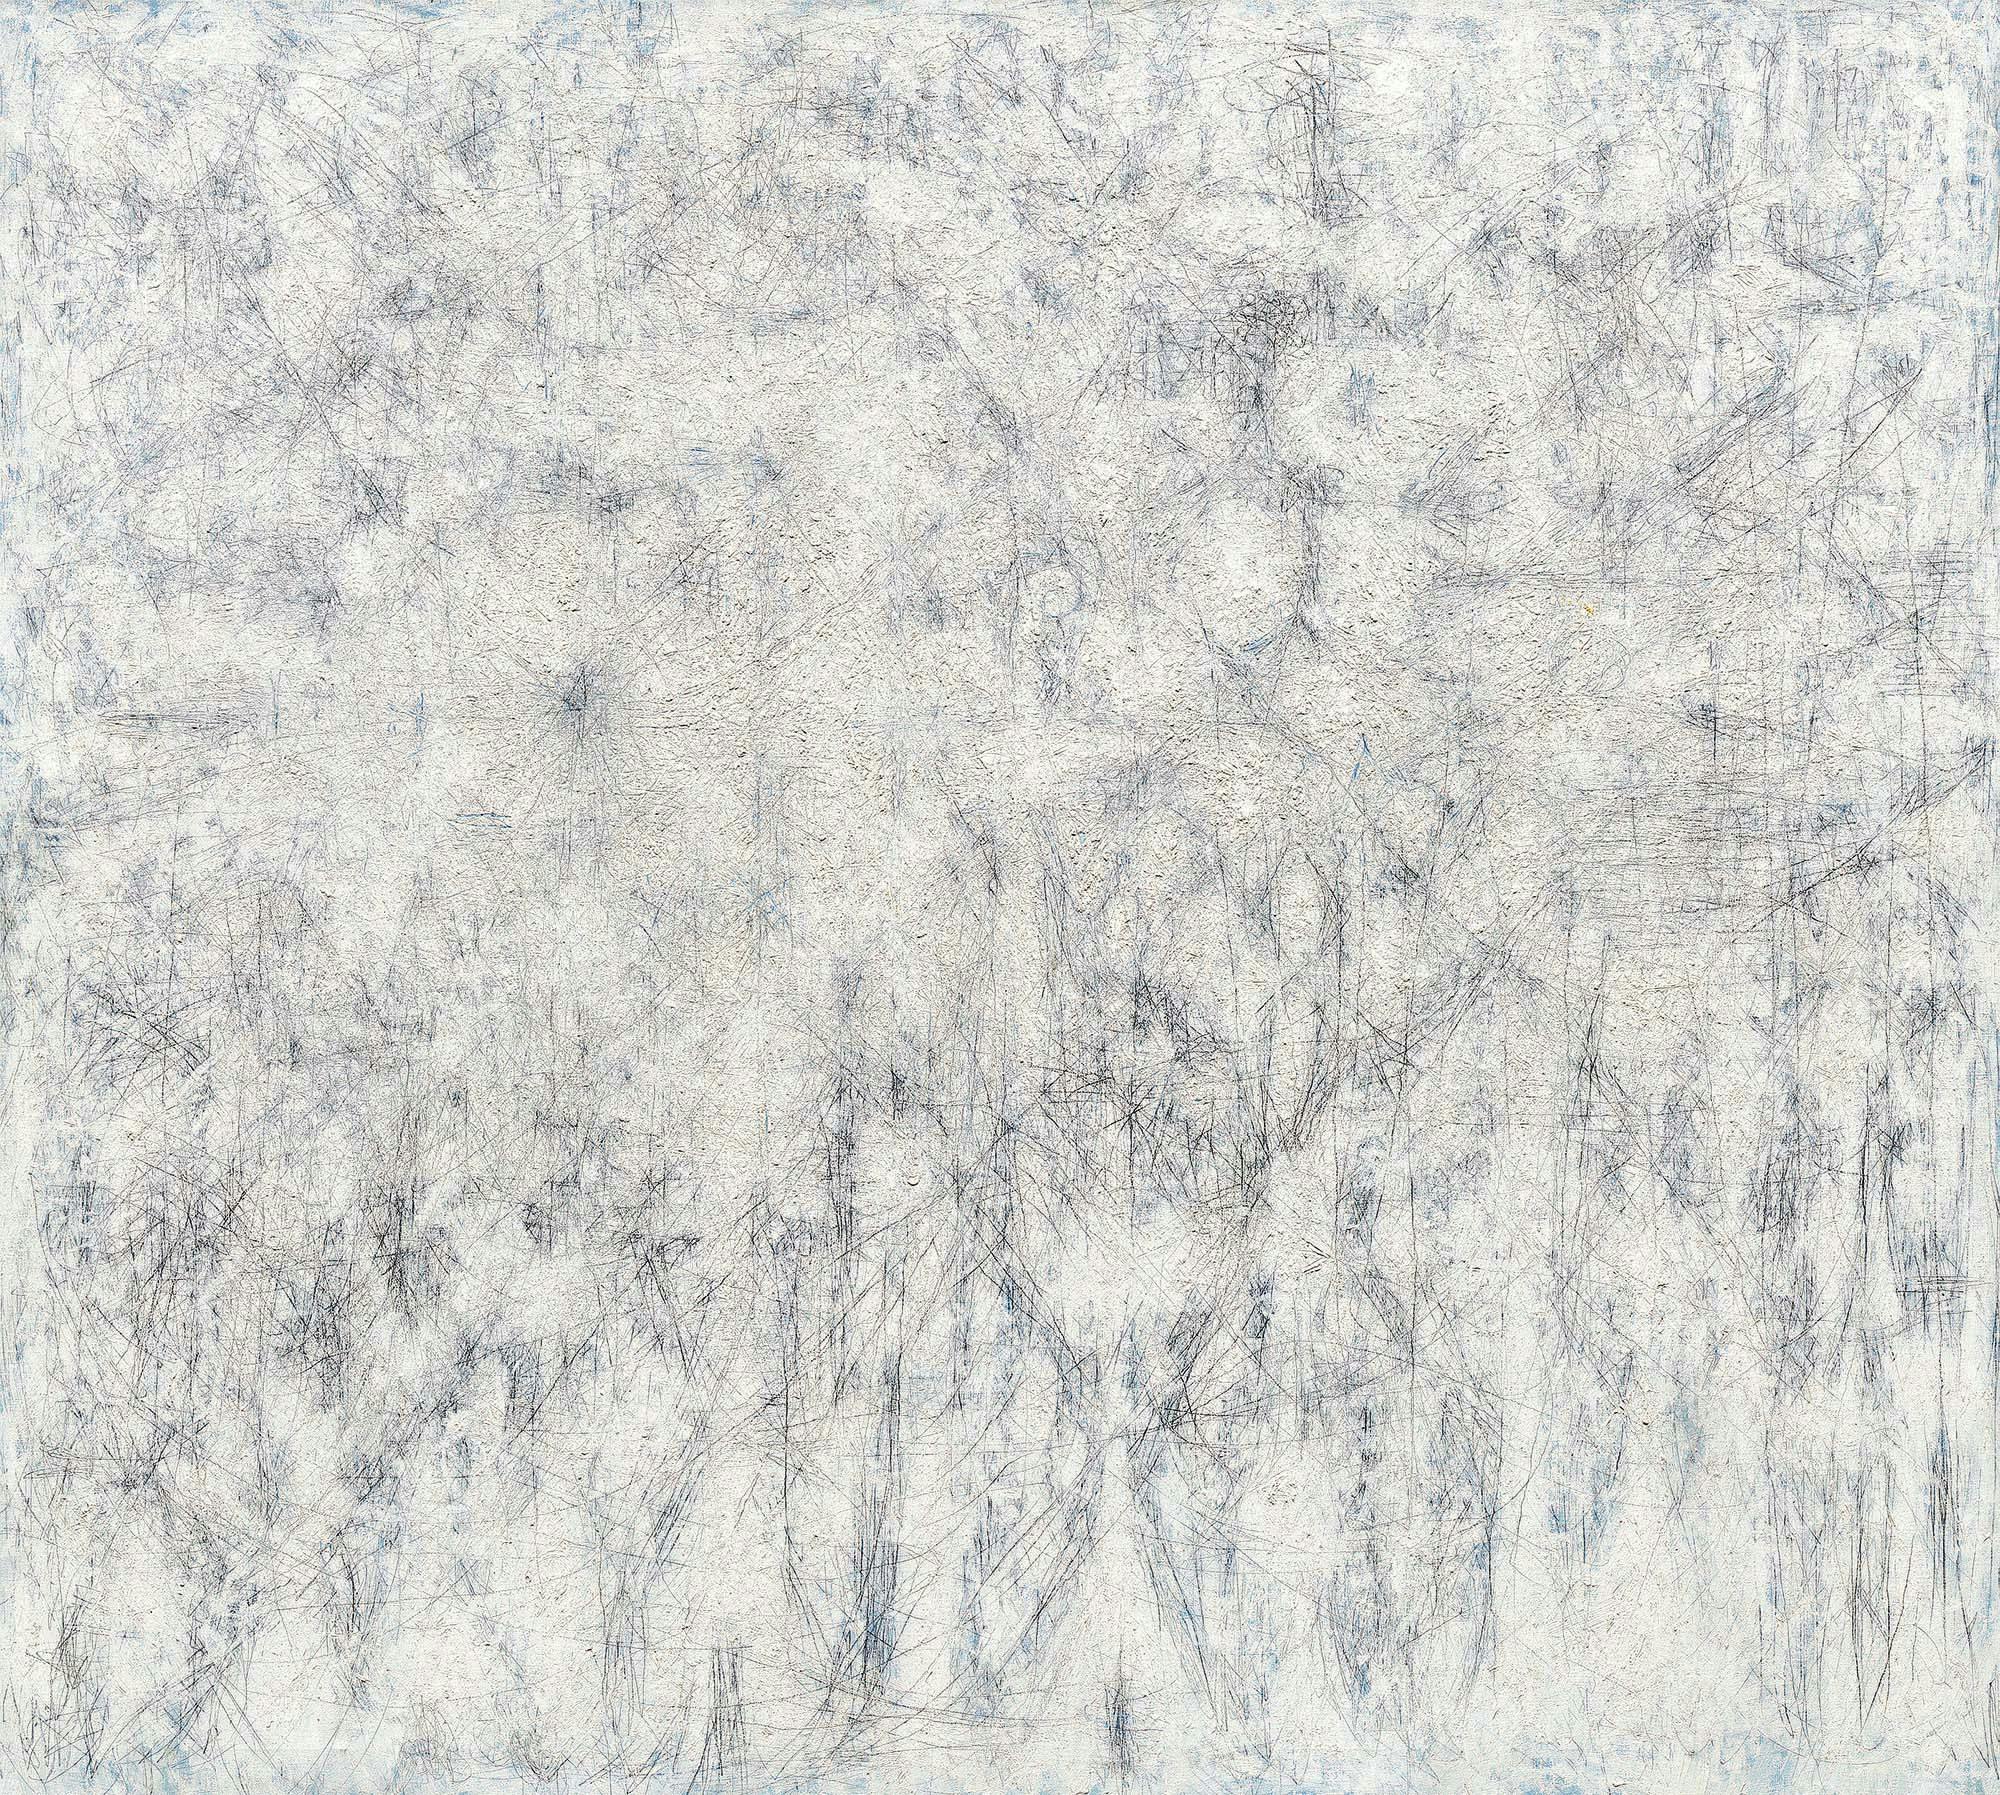 White Garden, Sky
1951
Oil and graphite on linen
53 1/2 x 60 3/4 in. (135.9 x 154.3 cm)  
National Gallery of Art, Washington, D.C., Patrons' Permanent Fund (2006.38.1)
 – The Richard Pousette-Dart Foundation